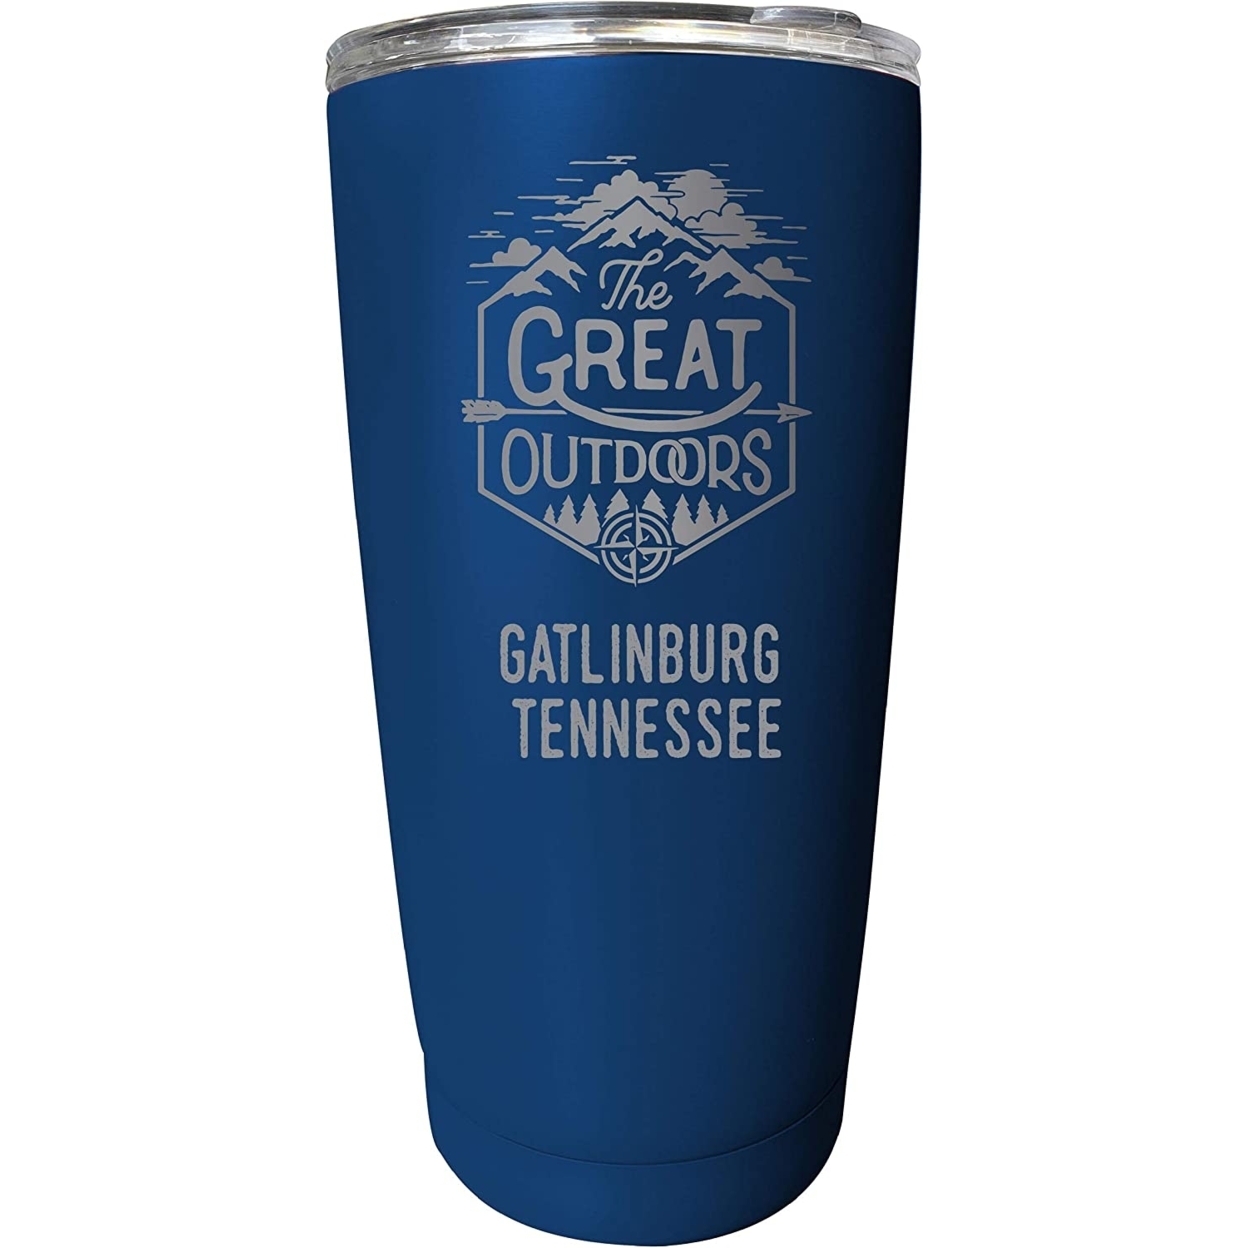 Gatlinburg Tennessee Etched 16 Oz Stainless Steel Insulated Tumbler Outdoor Adventure Design - Black